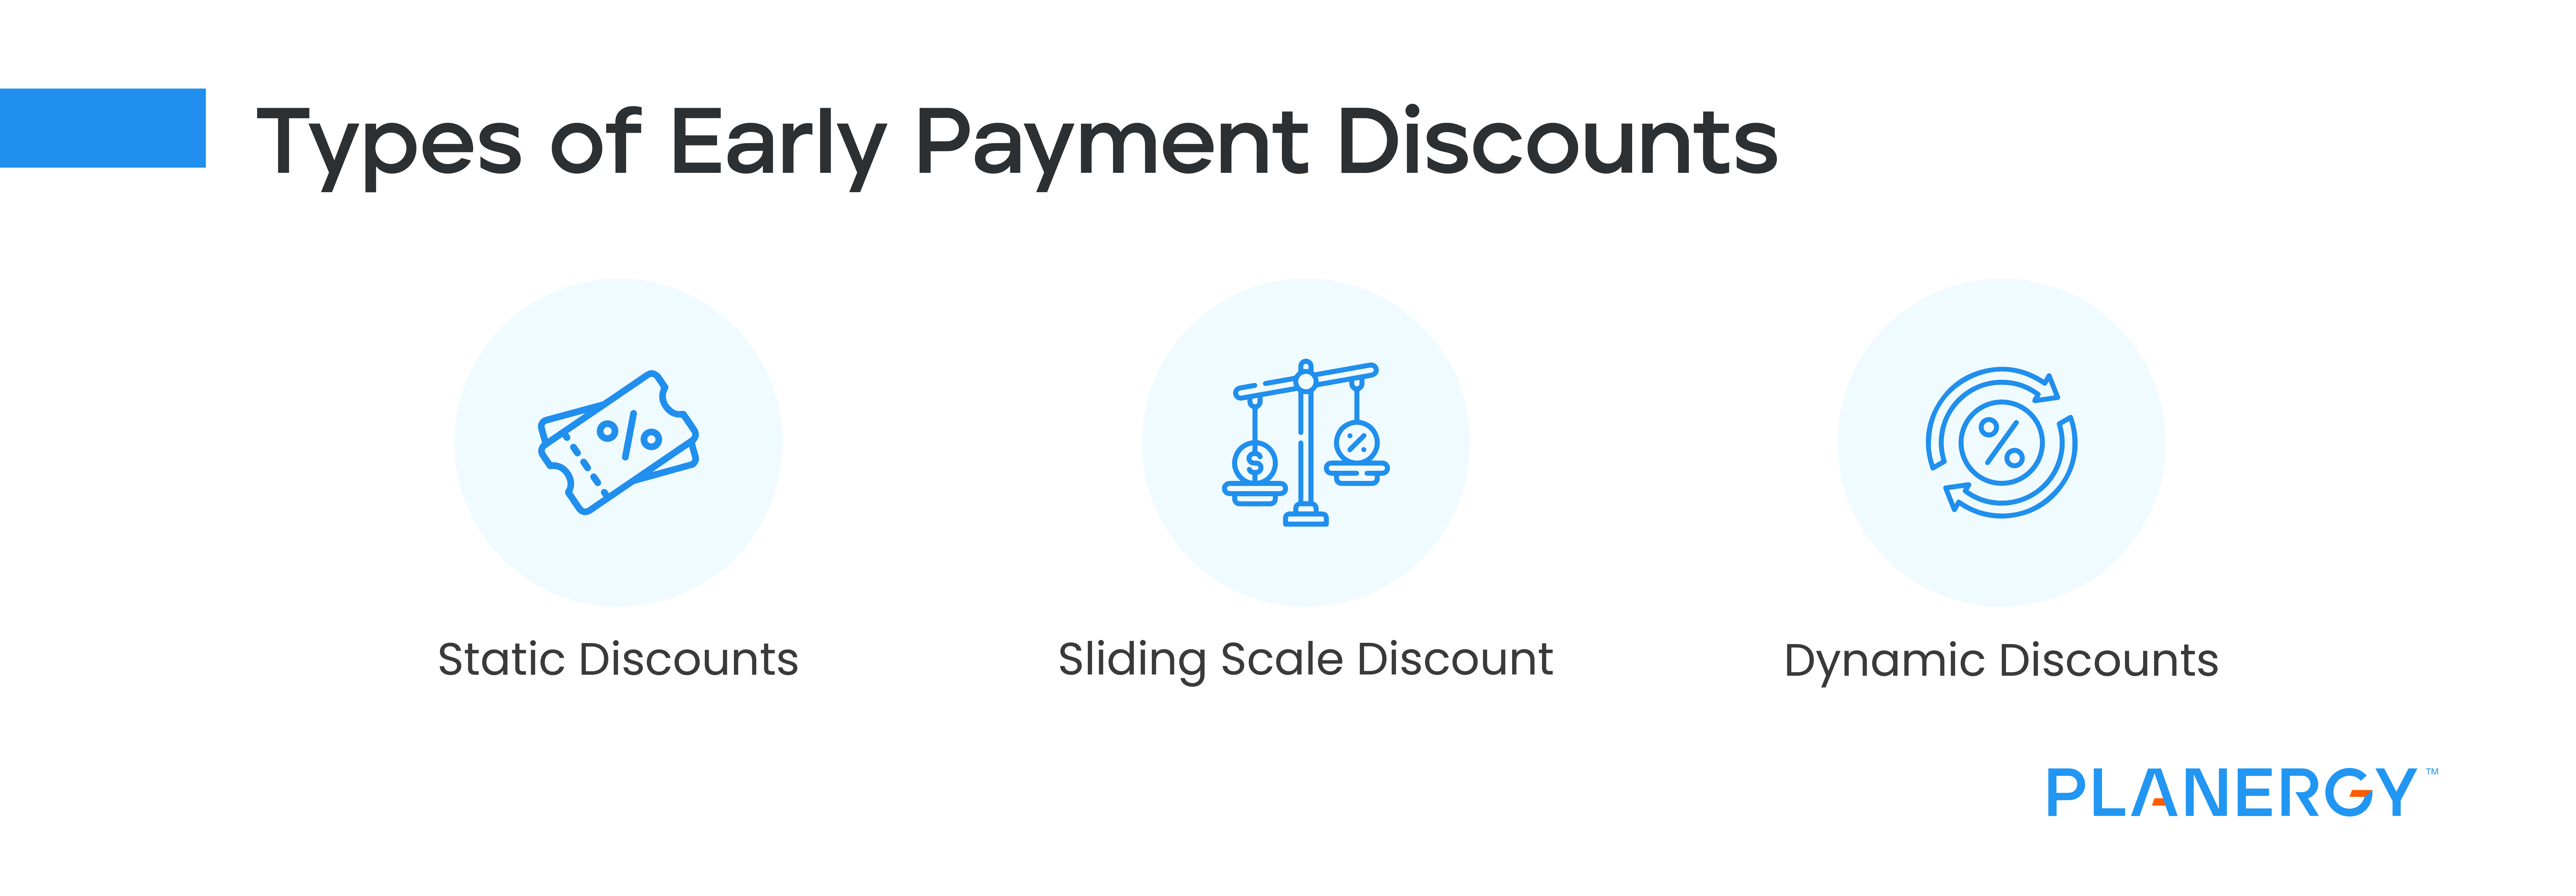 Types of Early Payment Discounts